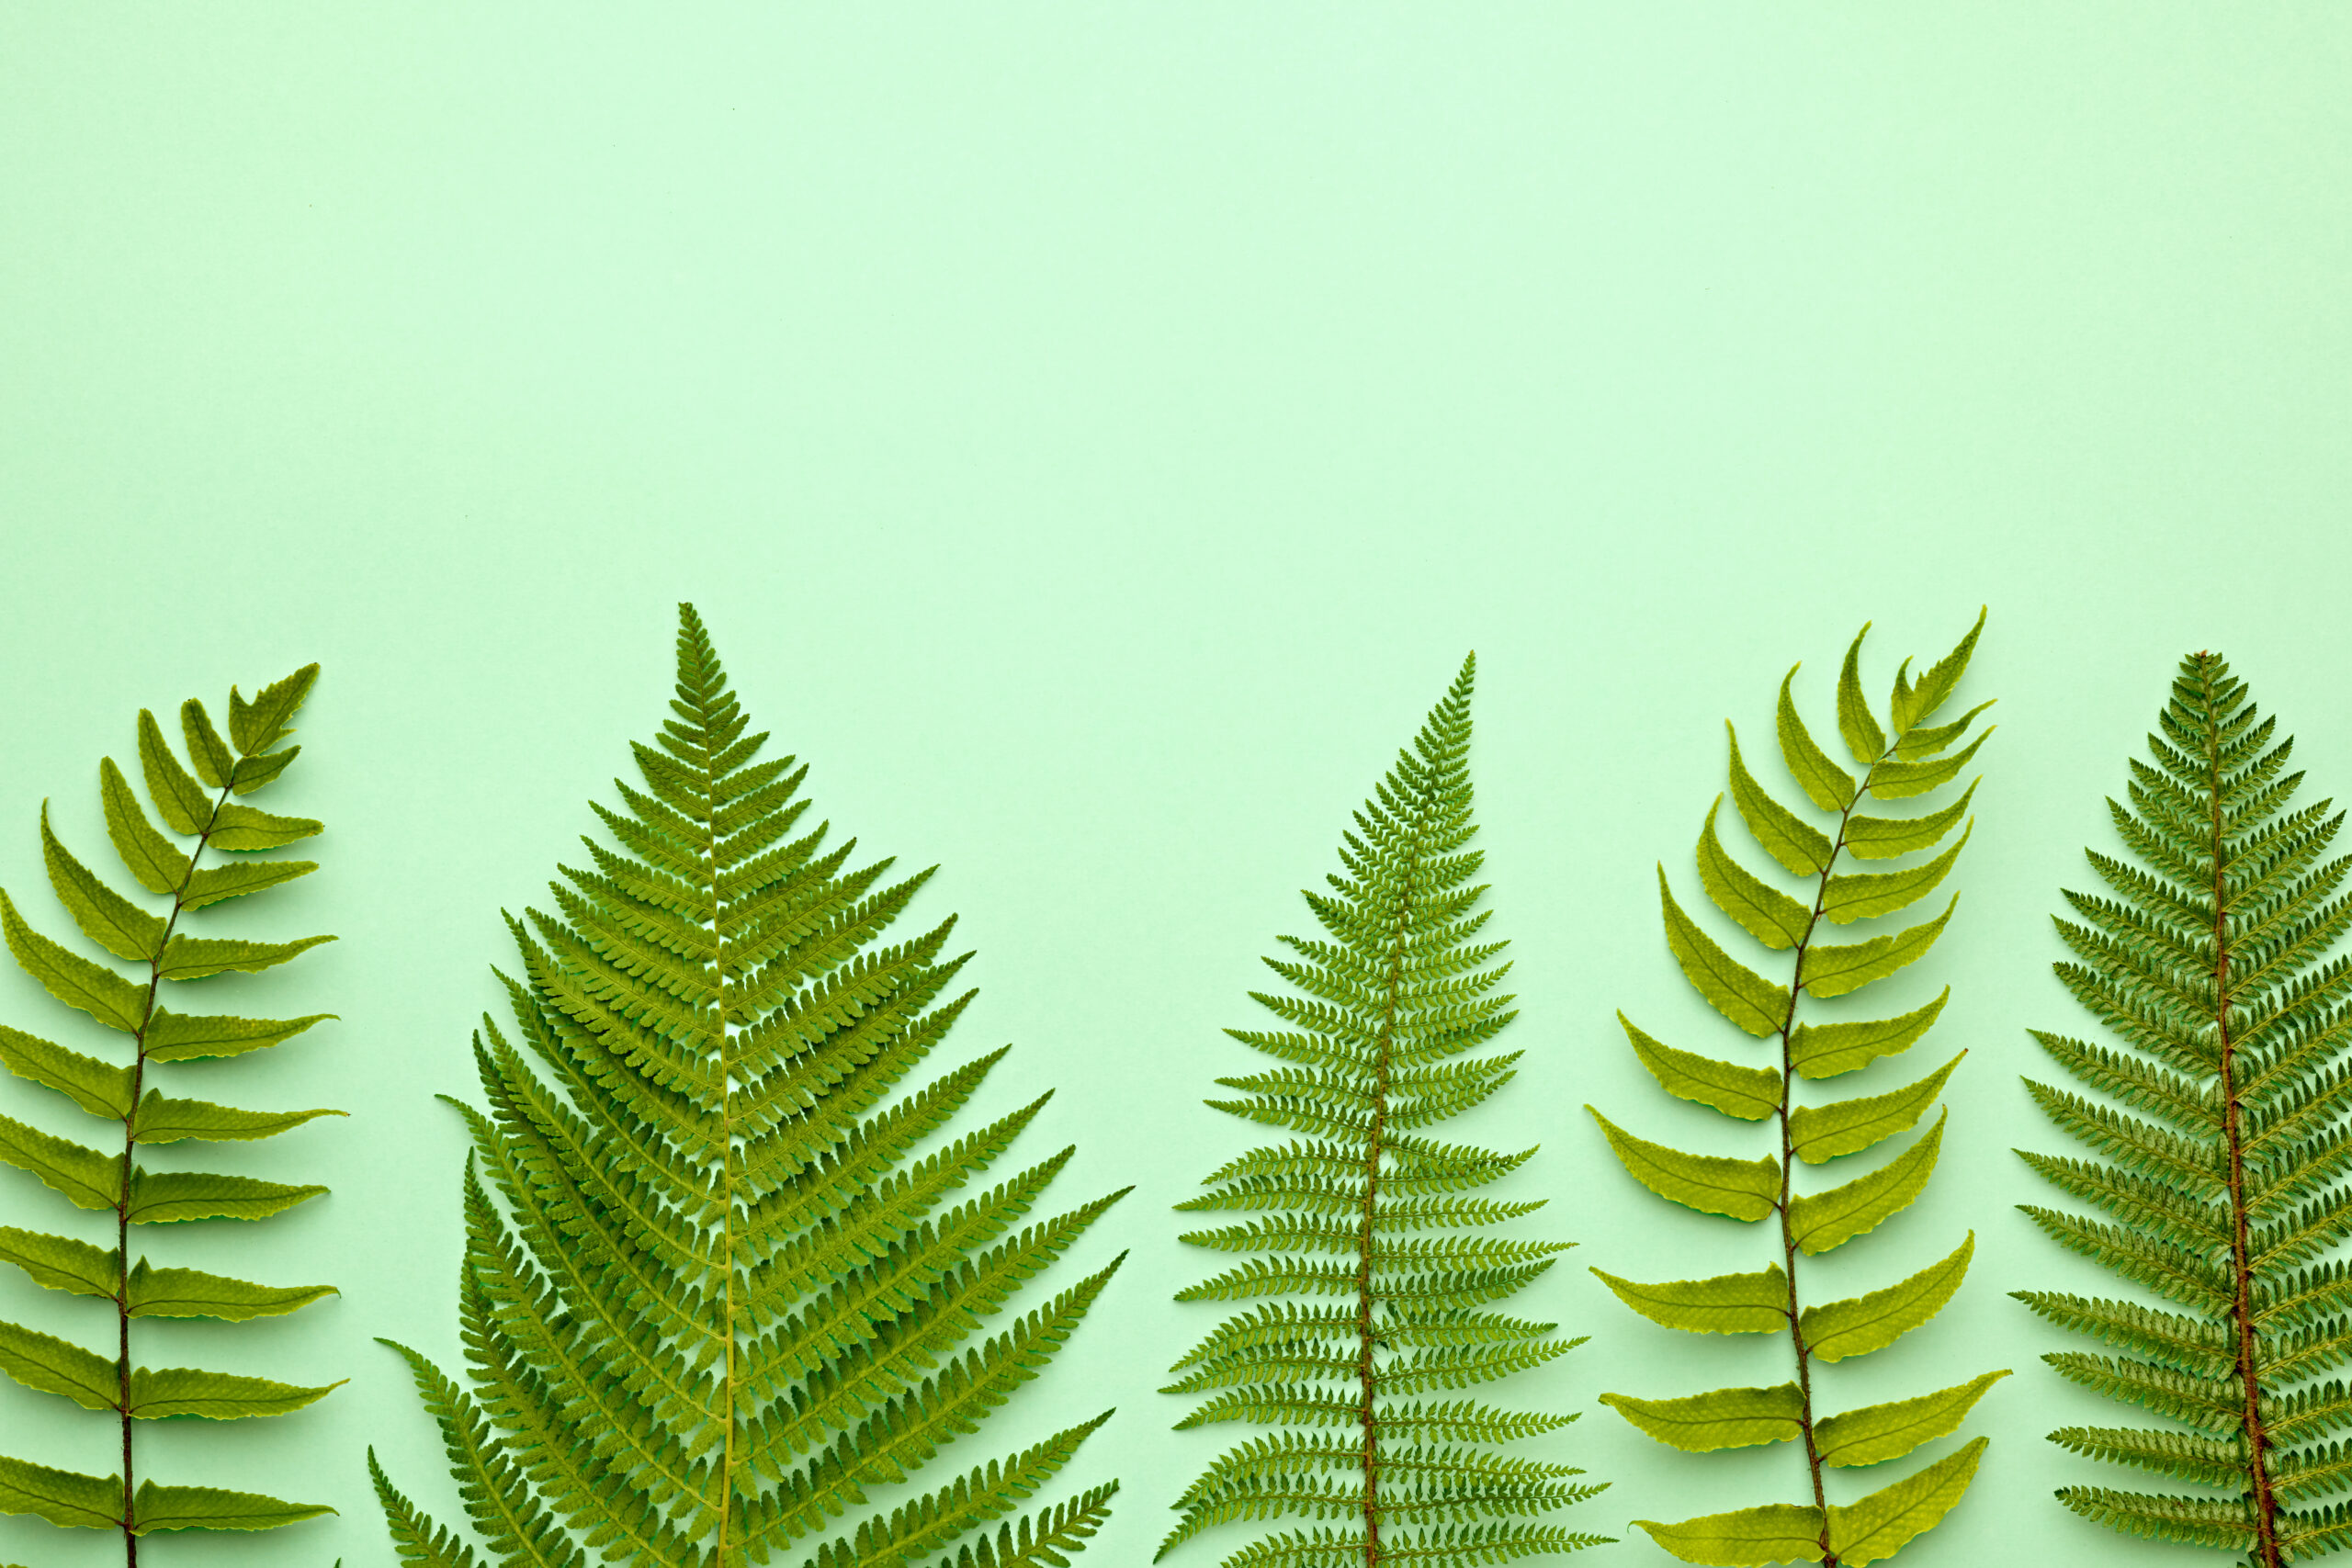 A variety of ferns laid on a green background